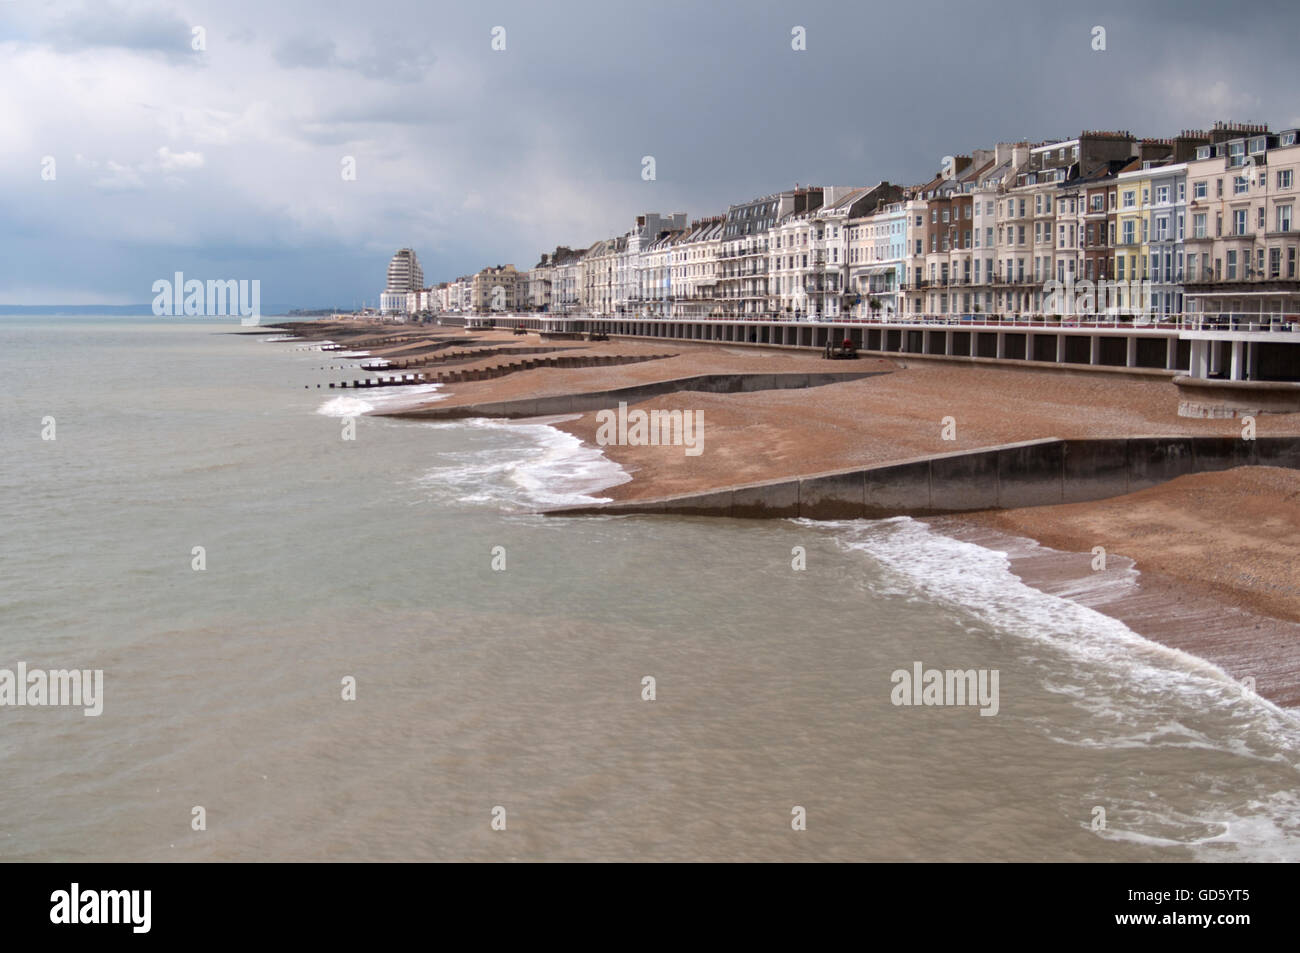 27th APRIL 2016. HASTINGS, EAST SUSSEX, UK. Hastings seafront, viewed from the pier. Stock Photo